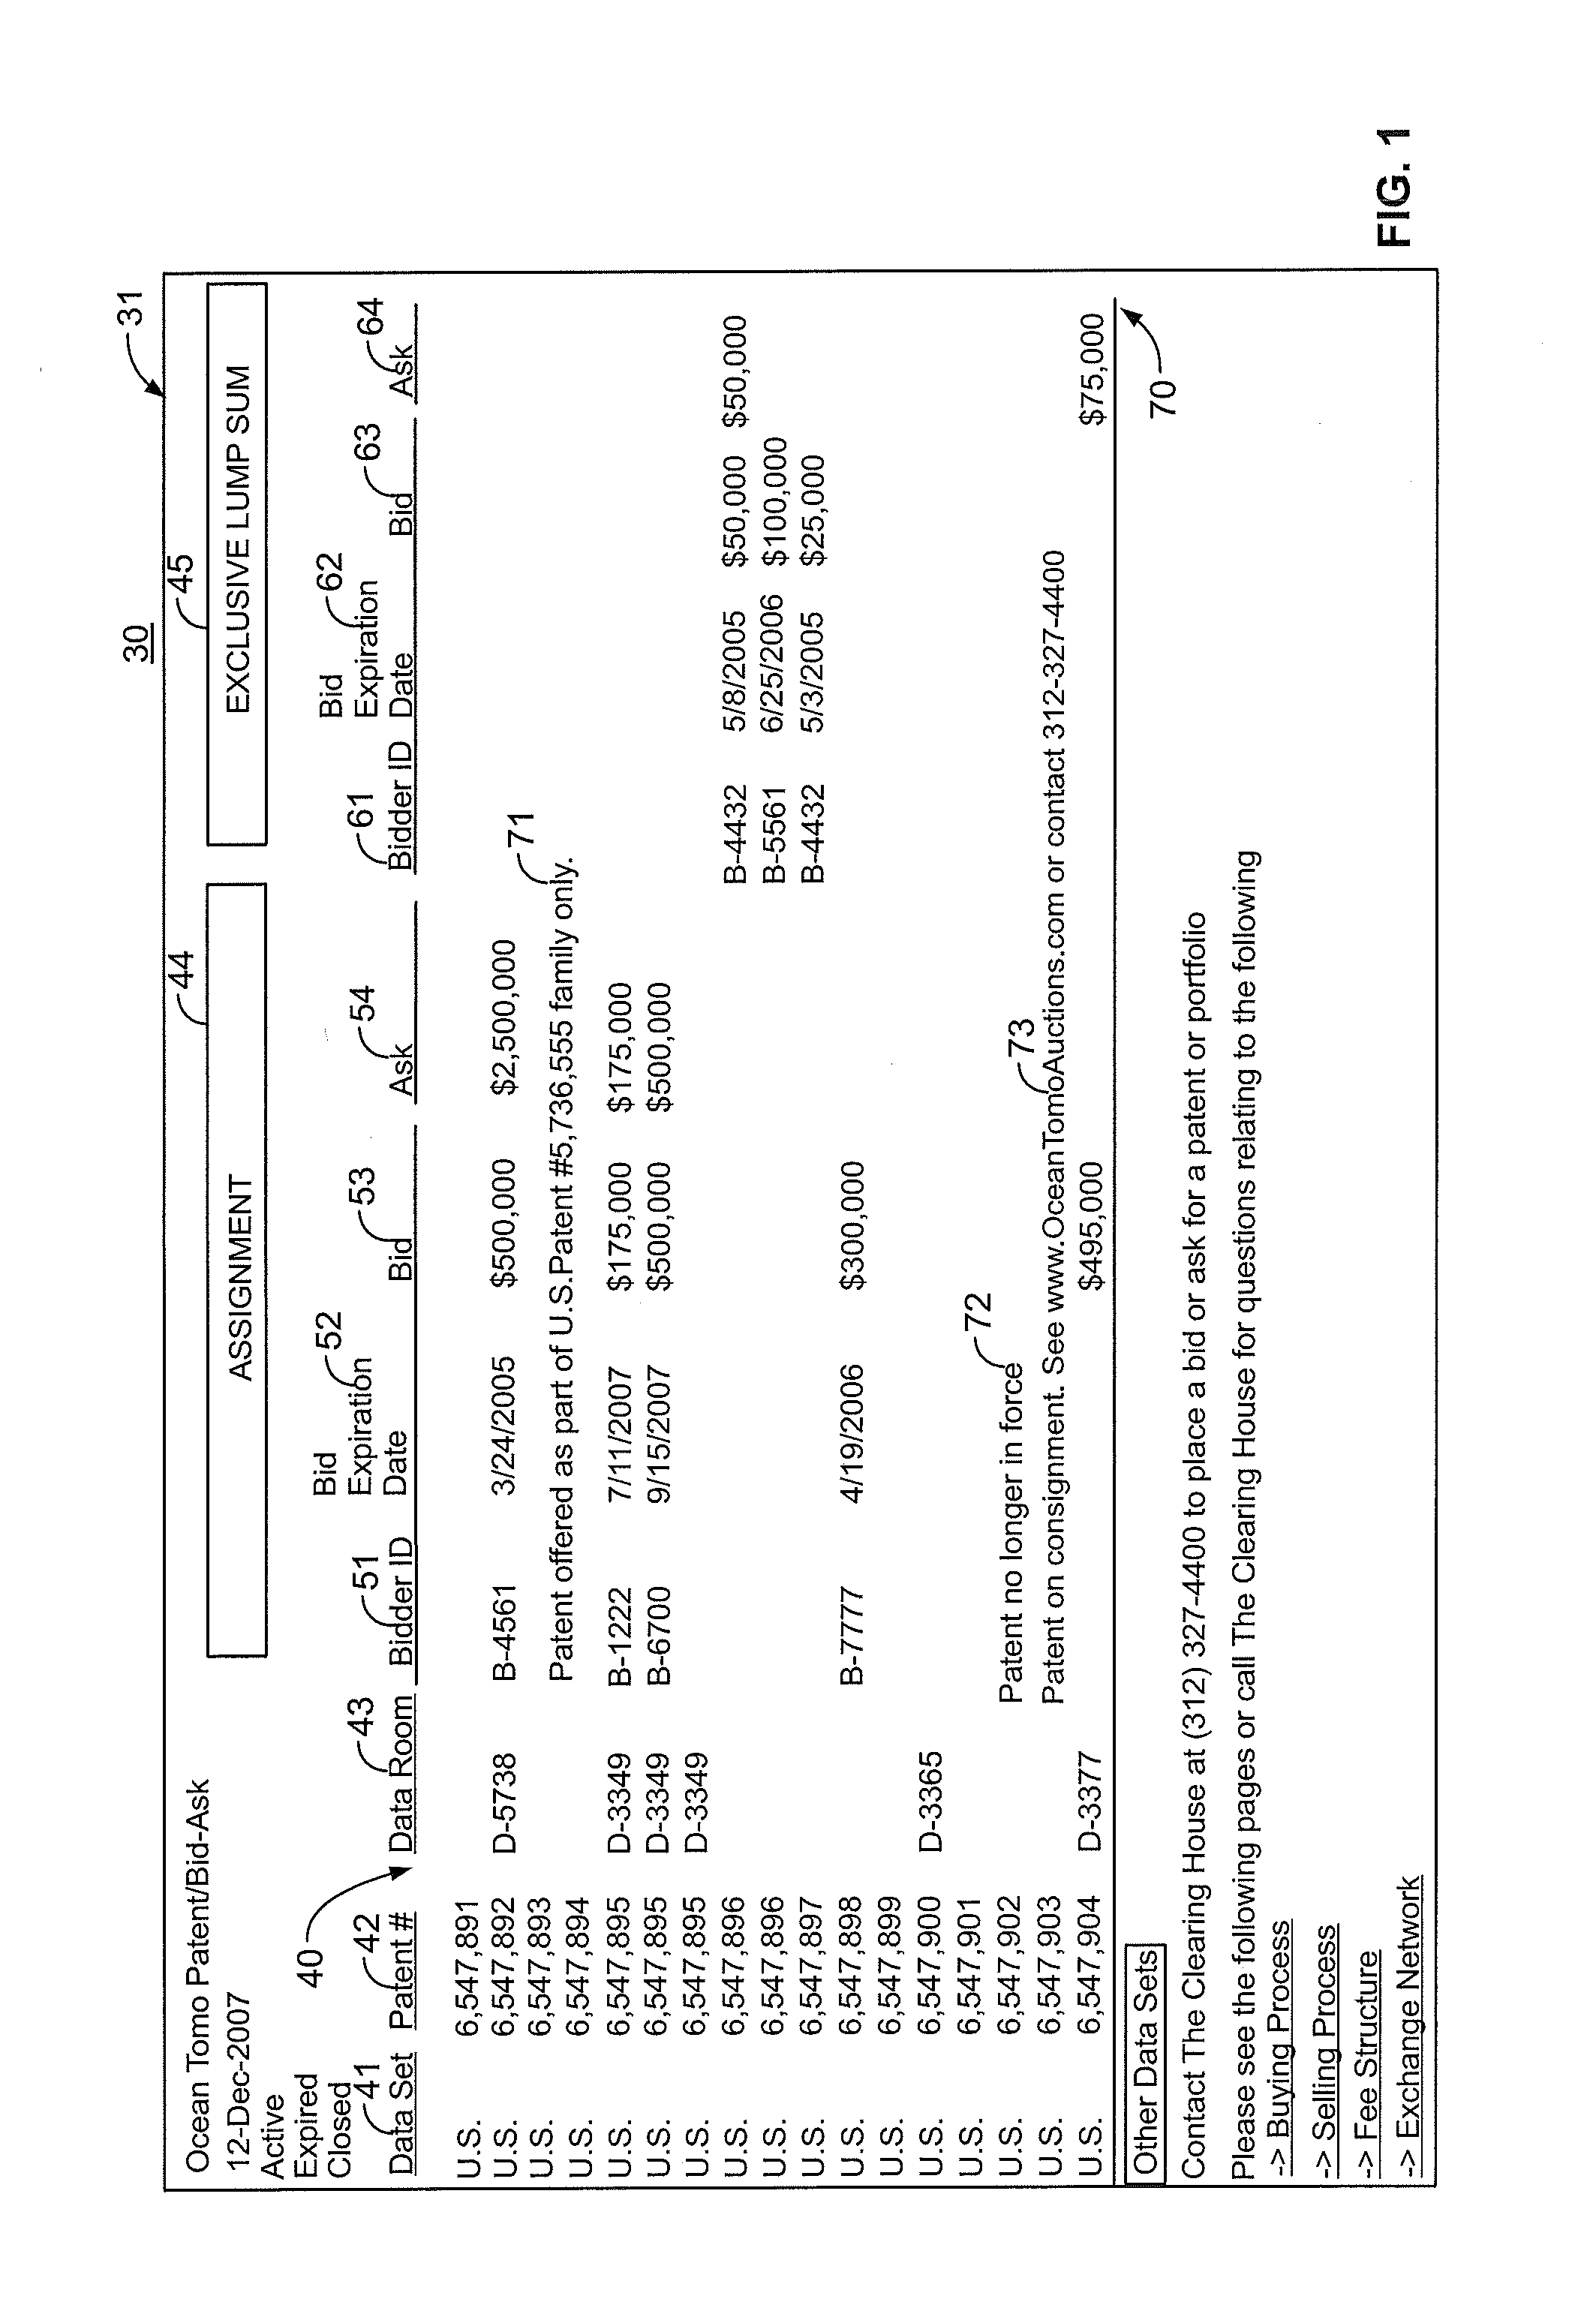 System and methods for valuing and trading intangible properties and instruments